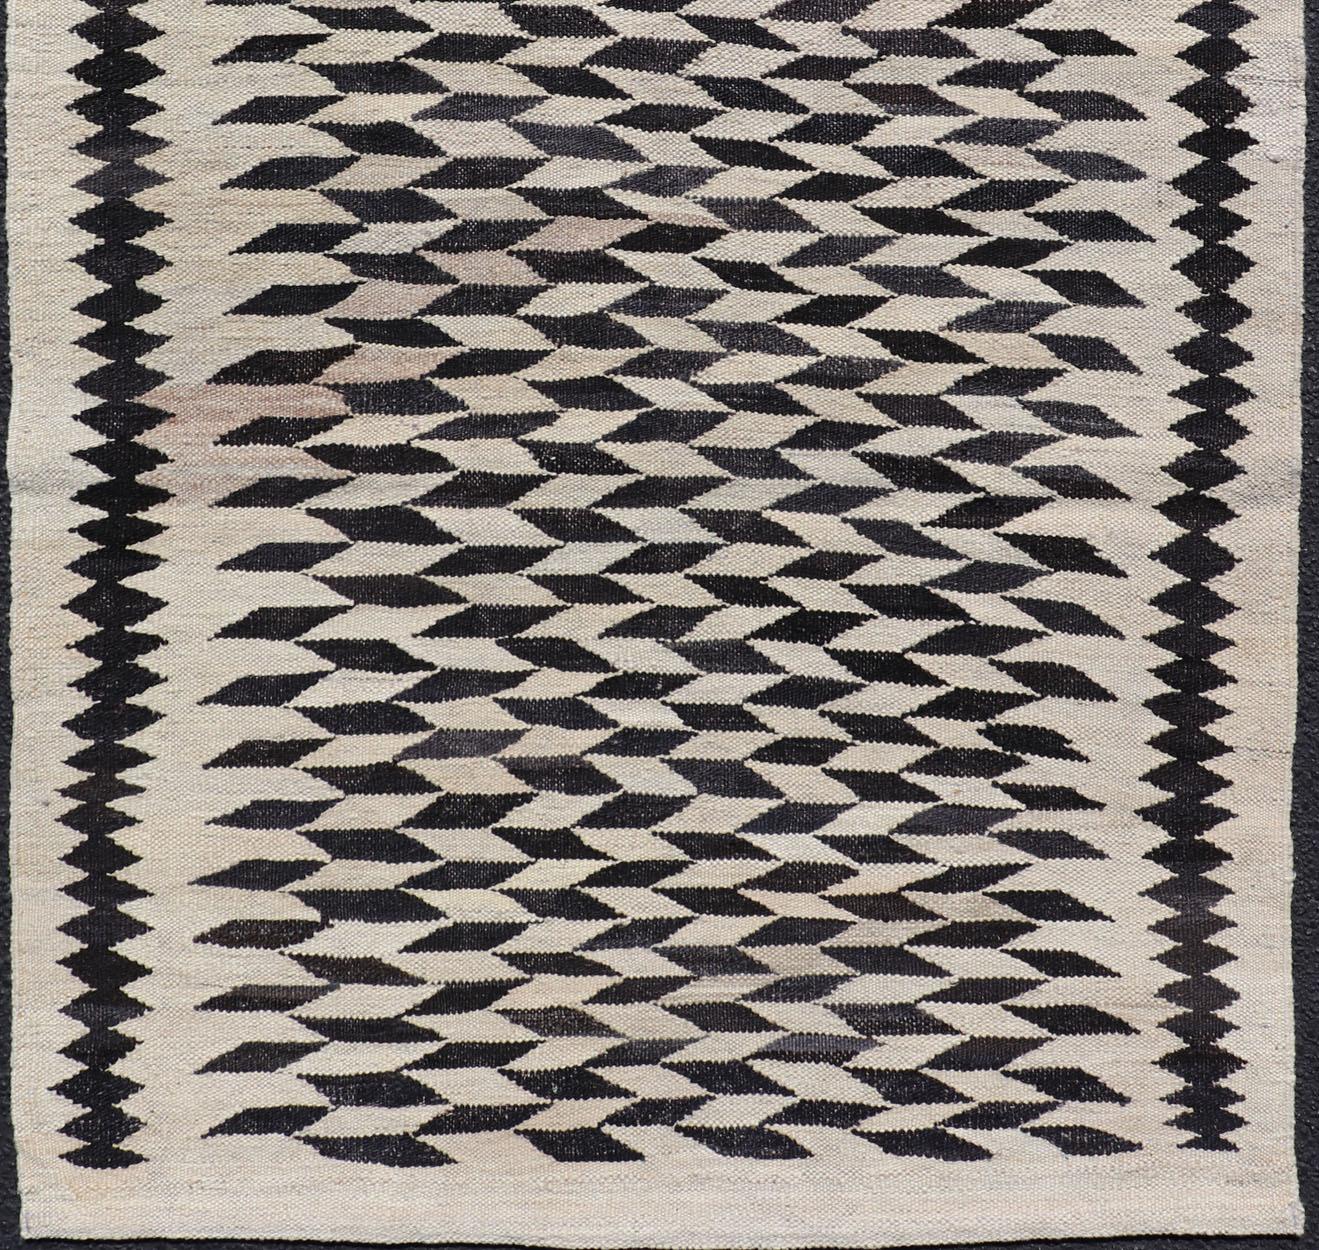 Modern and casual flat-woven Kilim rug in cream and black, Afghan Modern design Kilim Geometric design. Rug AFG-27703, country of origin / type: Afghanistan / Kilim

The unique free flowing design of this flat-weave Kilim rug makes it perfect for